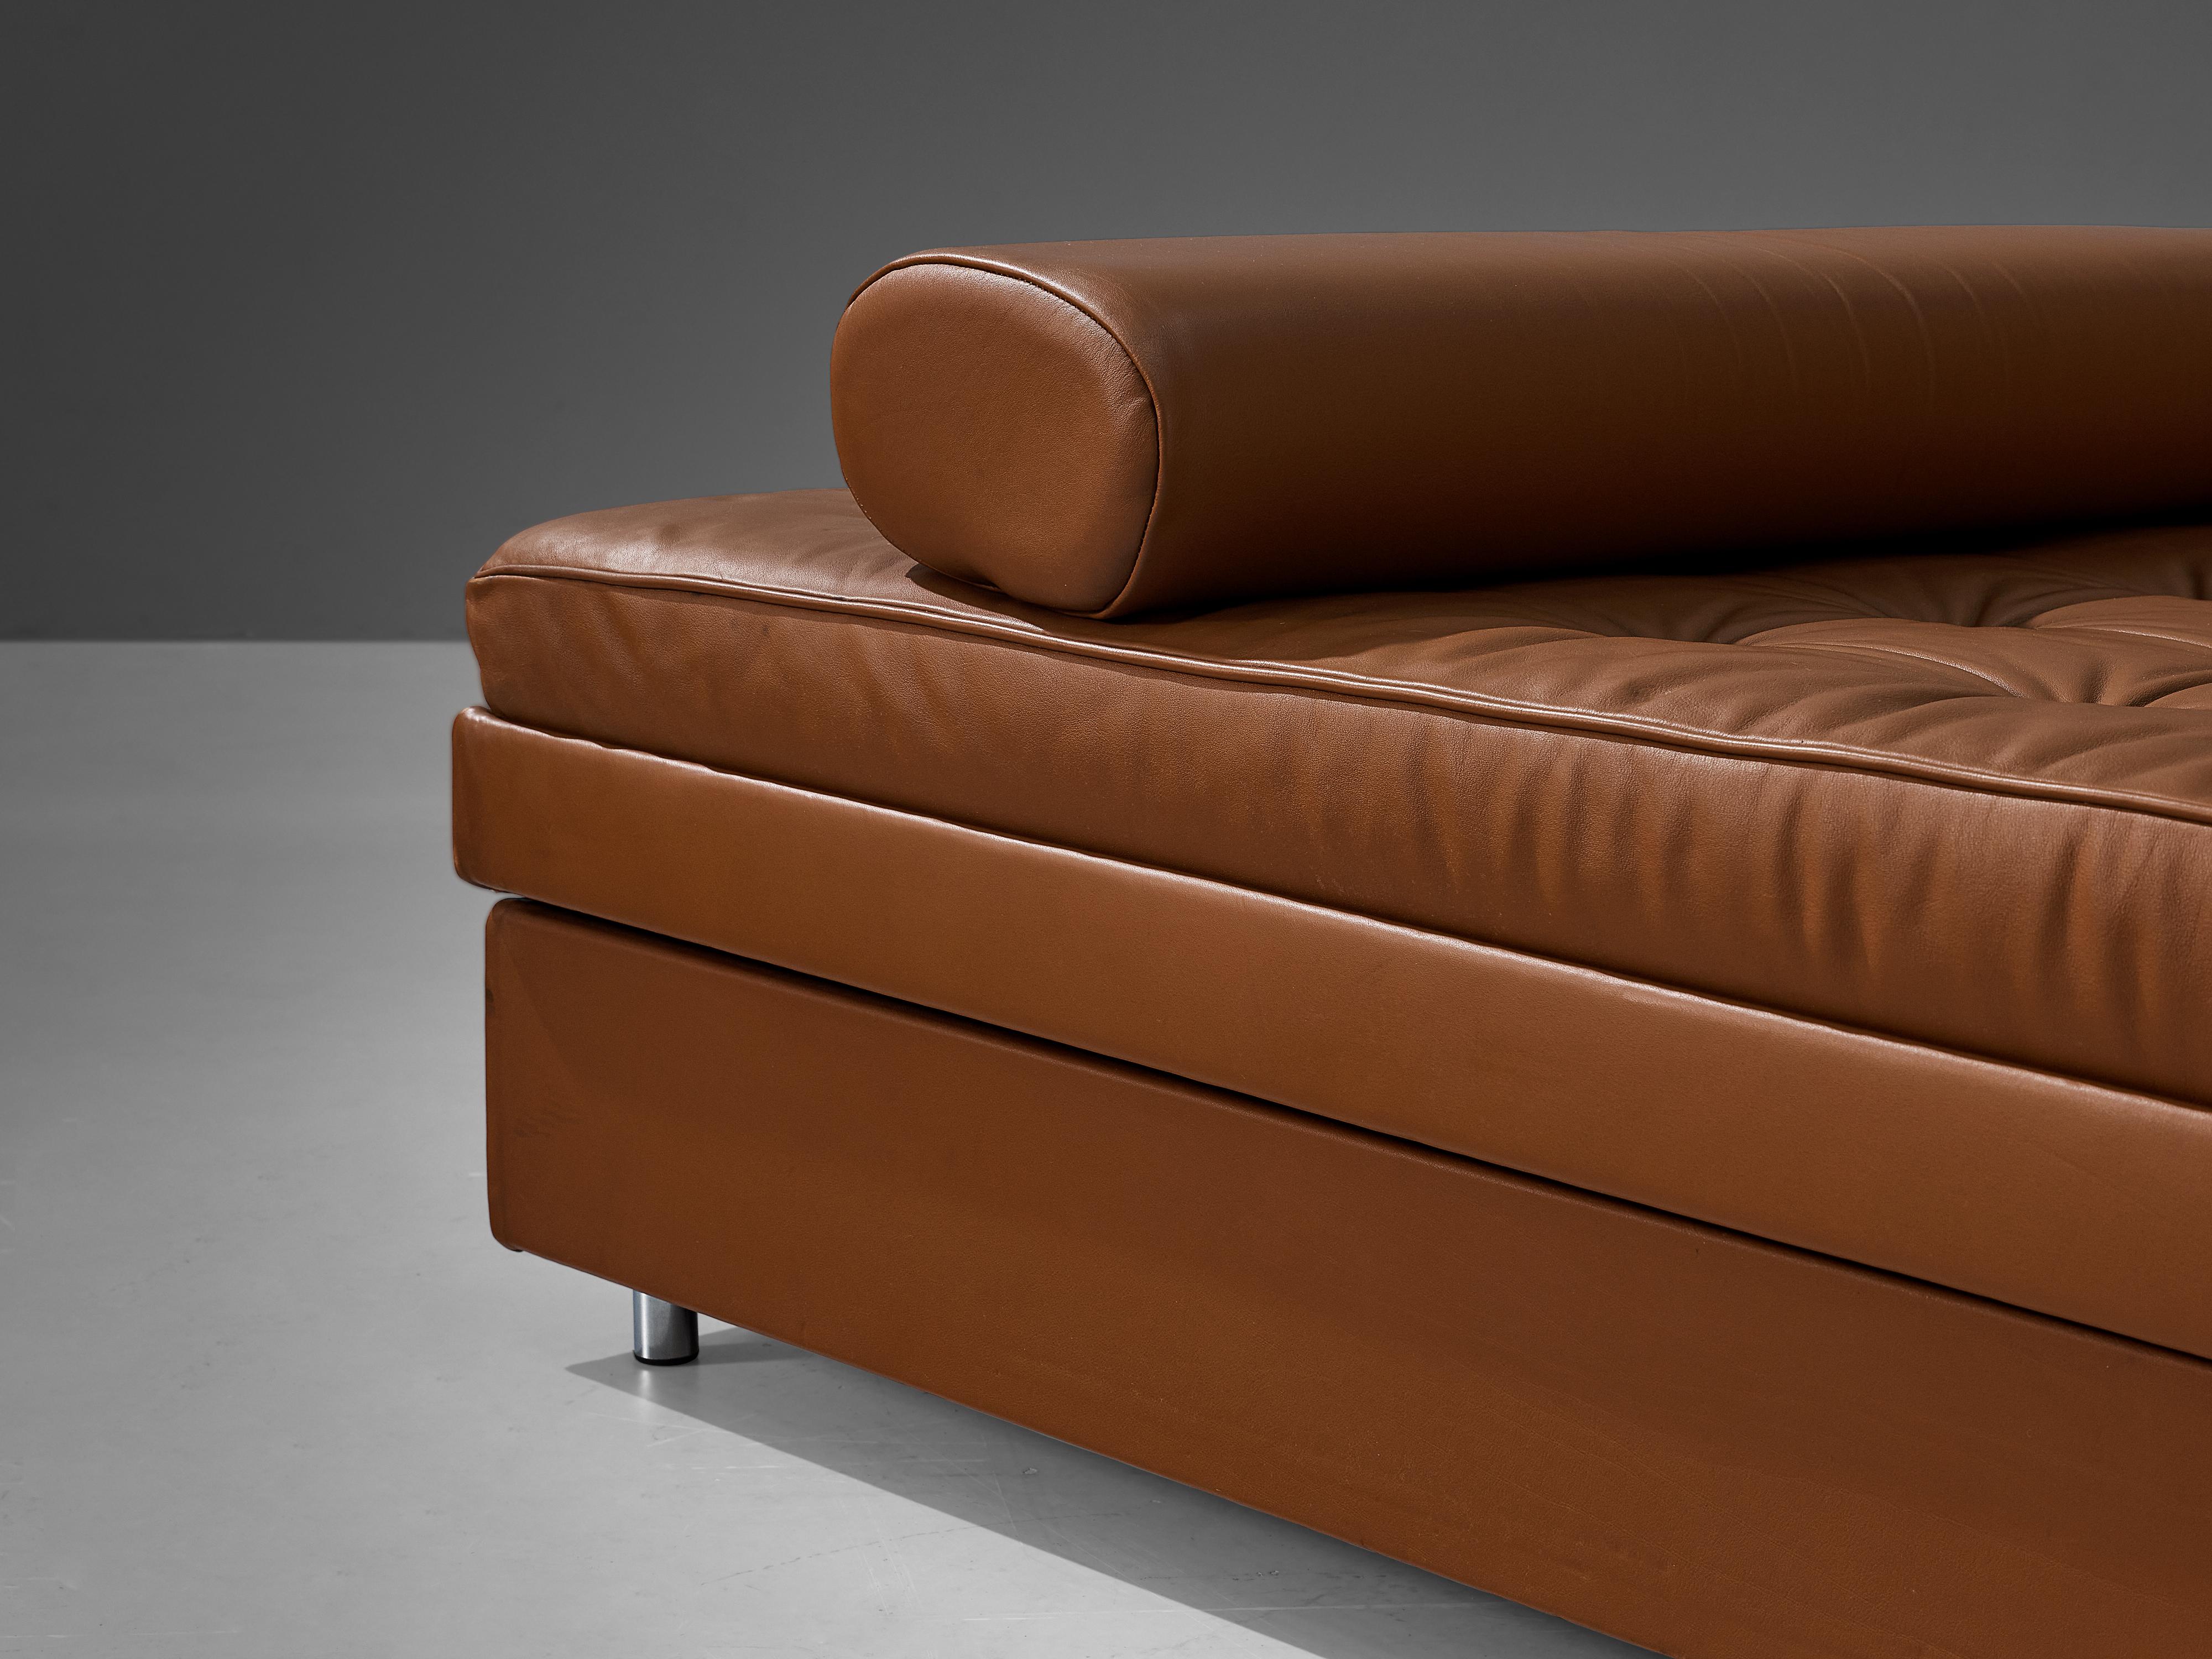 European Stylish Daybed in Cognac Leather